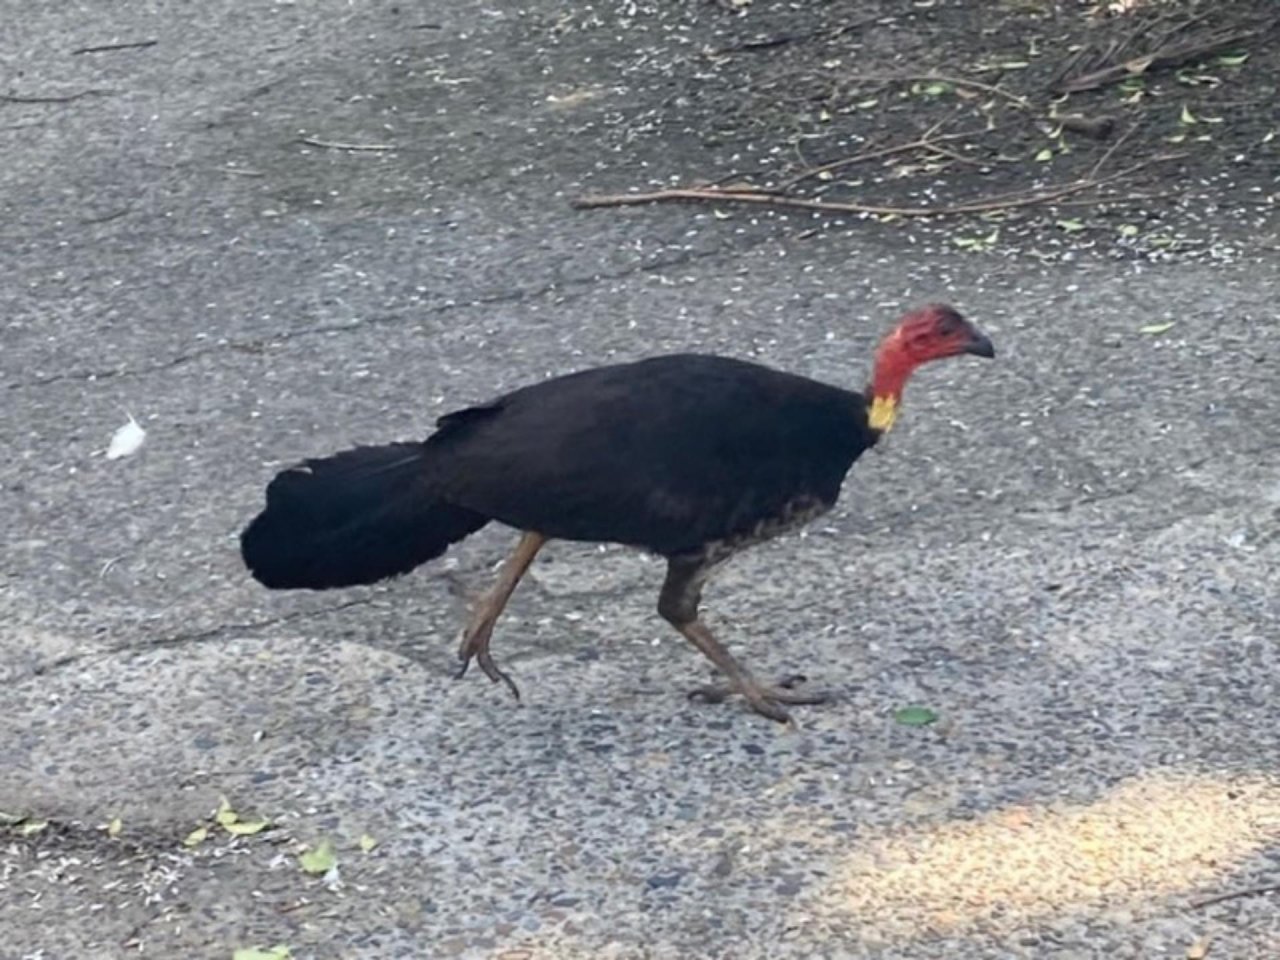 Brush-turkey in Big City Birds App spotted by Feather on 15.12.2020